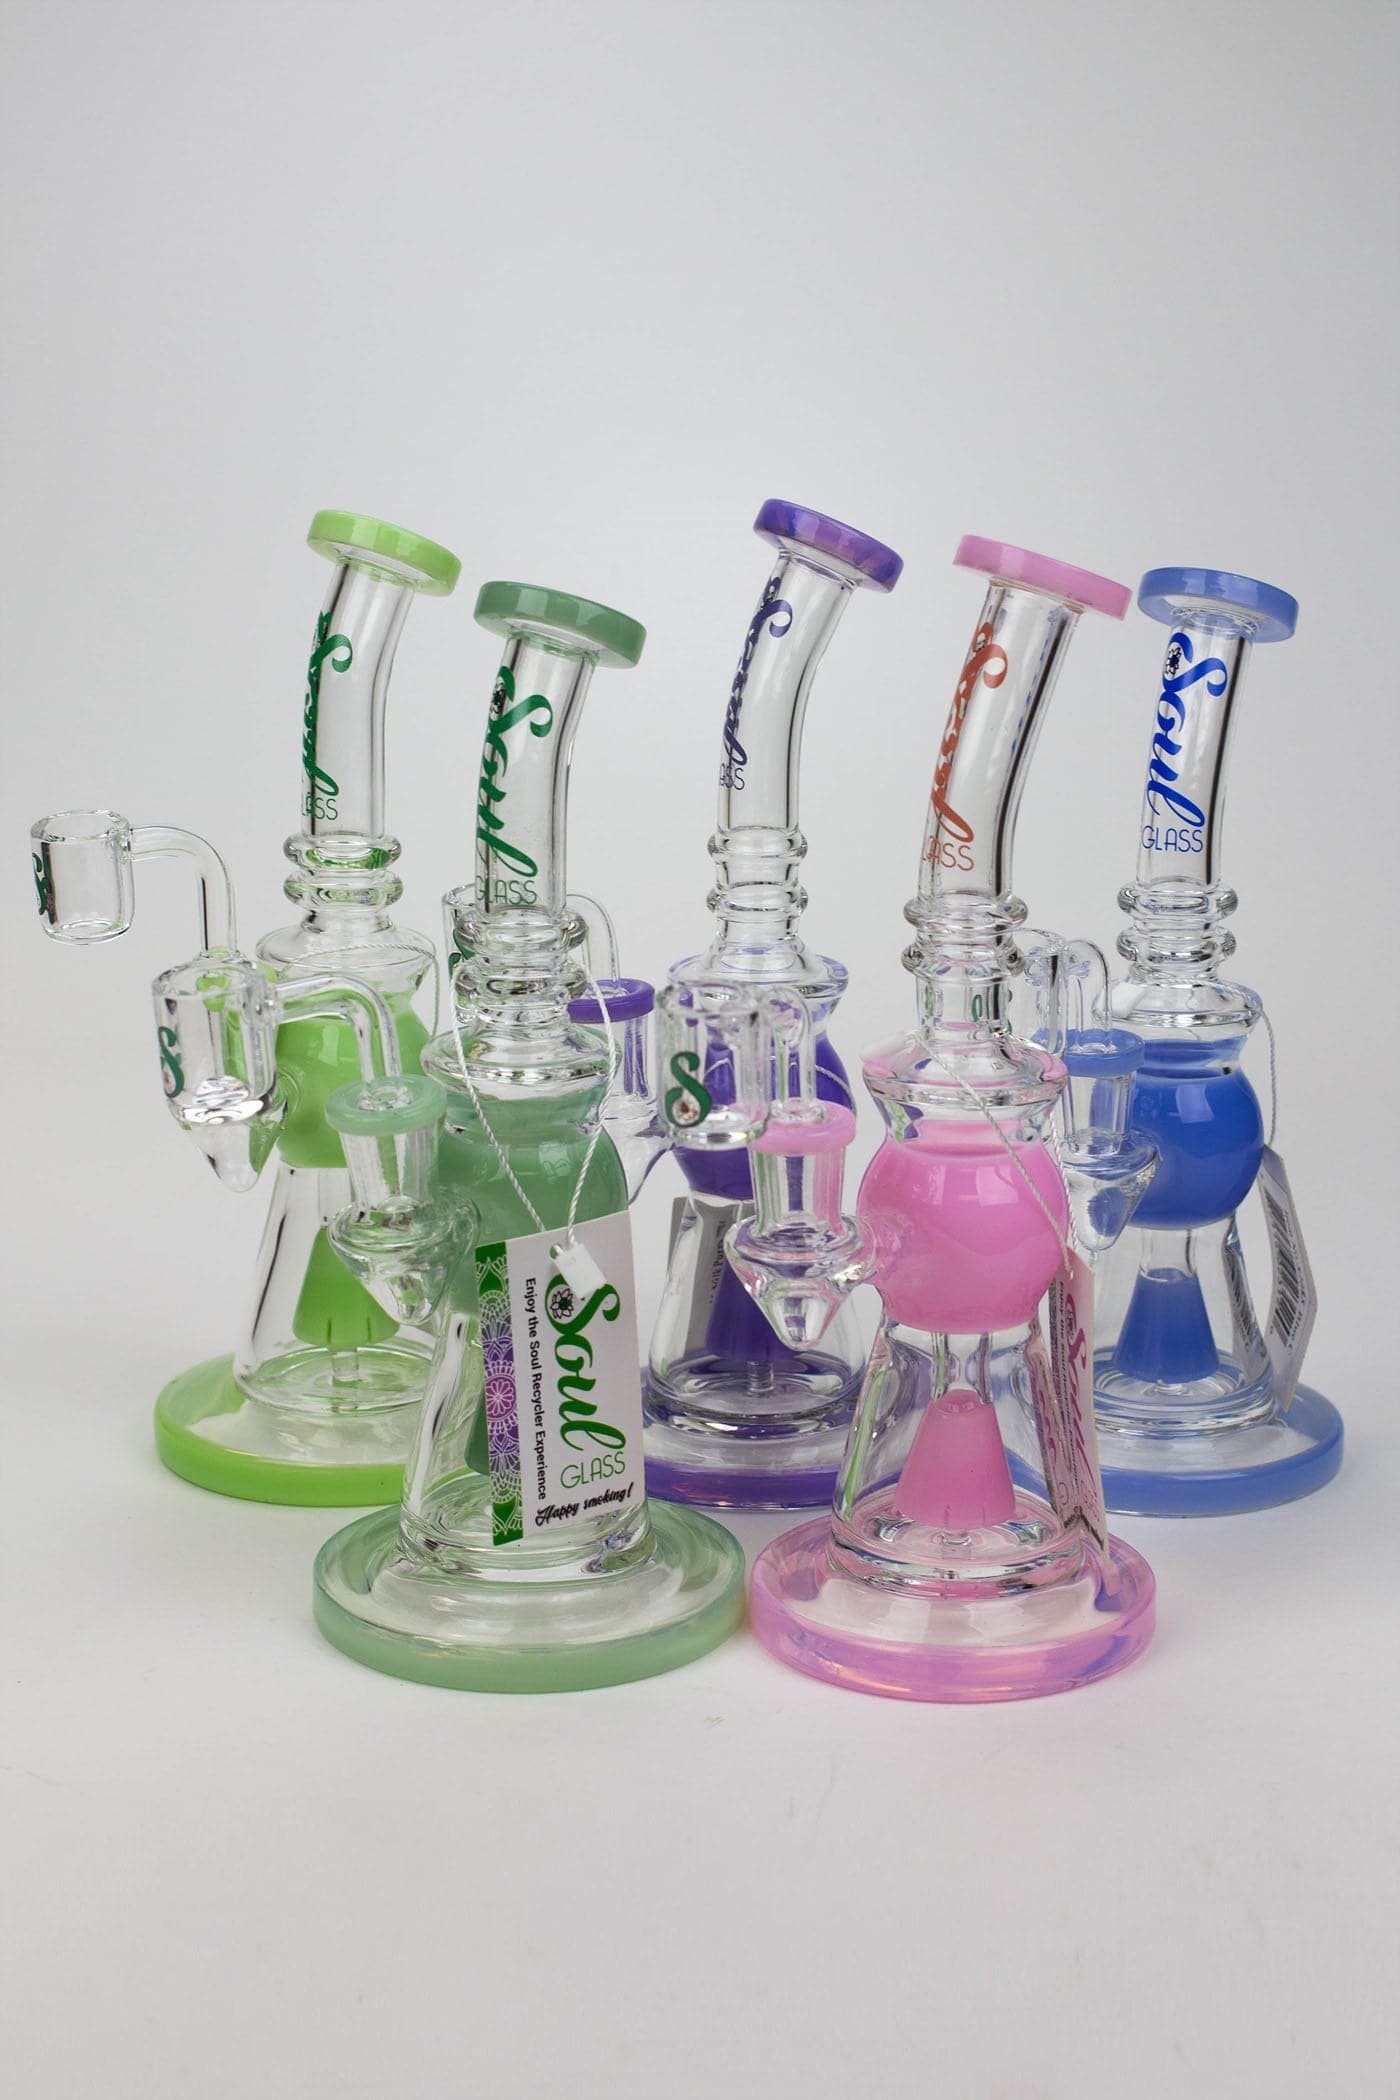 Soul glass 2-in-1 cone diffuser glass water pipes_0